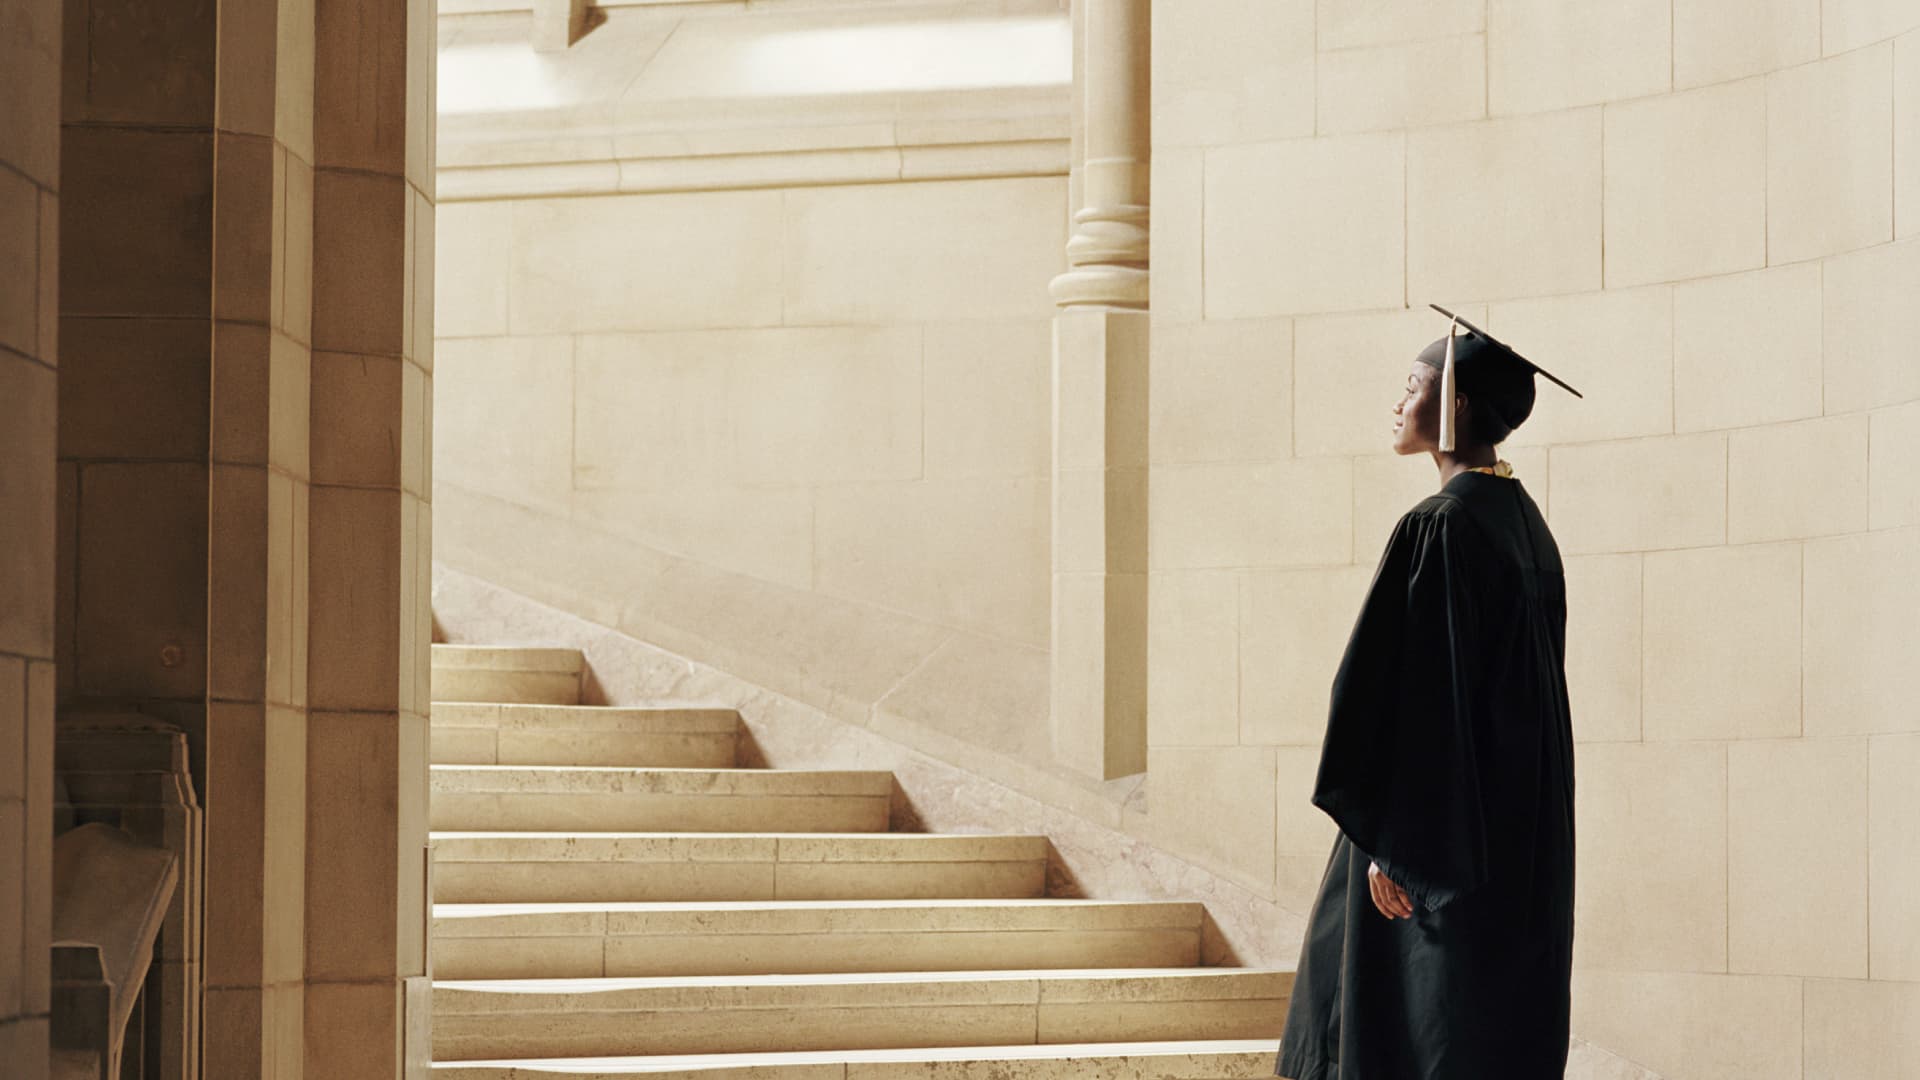 Woman wearing graduation cap and gown, ascending staircase, rear view